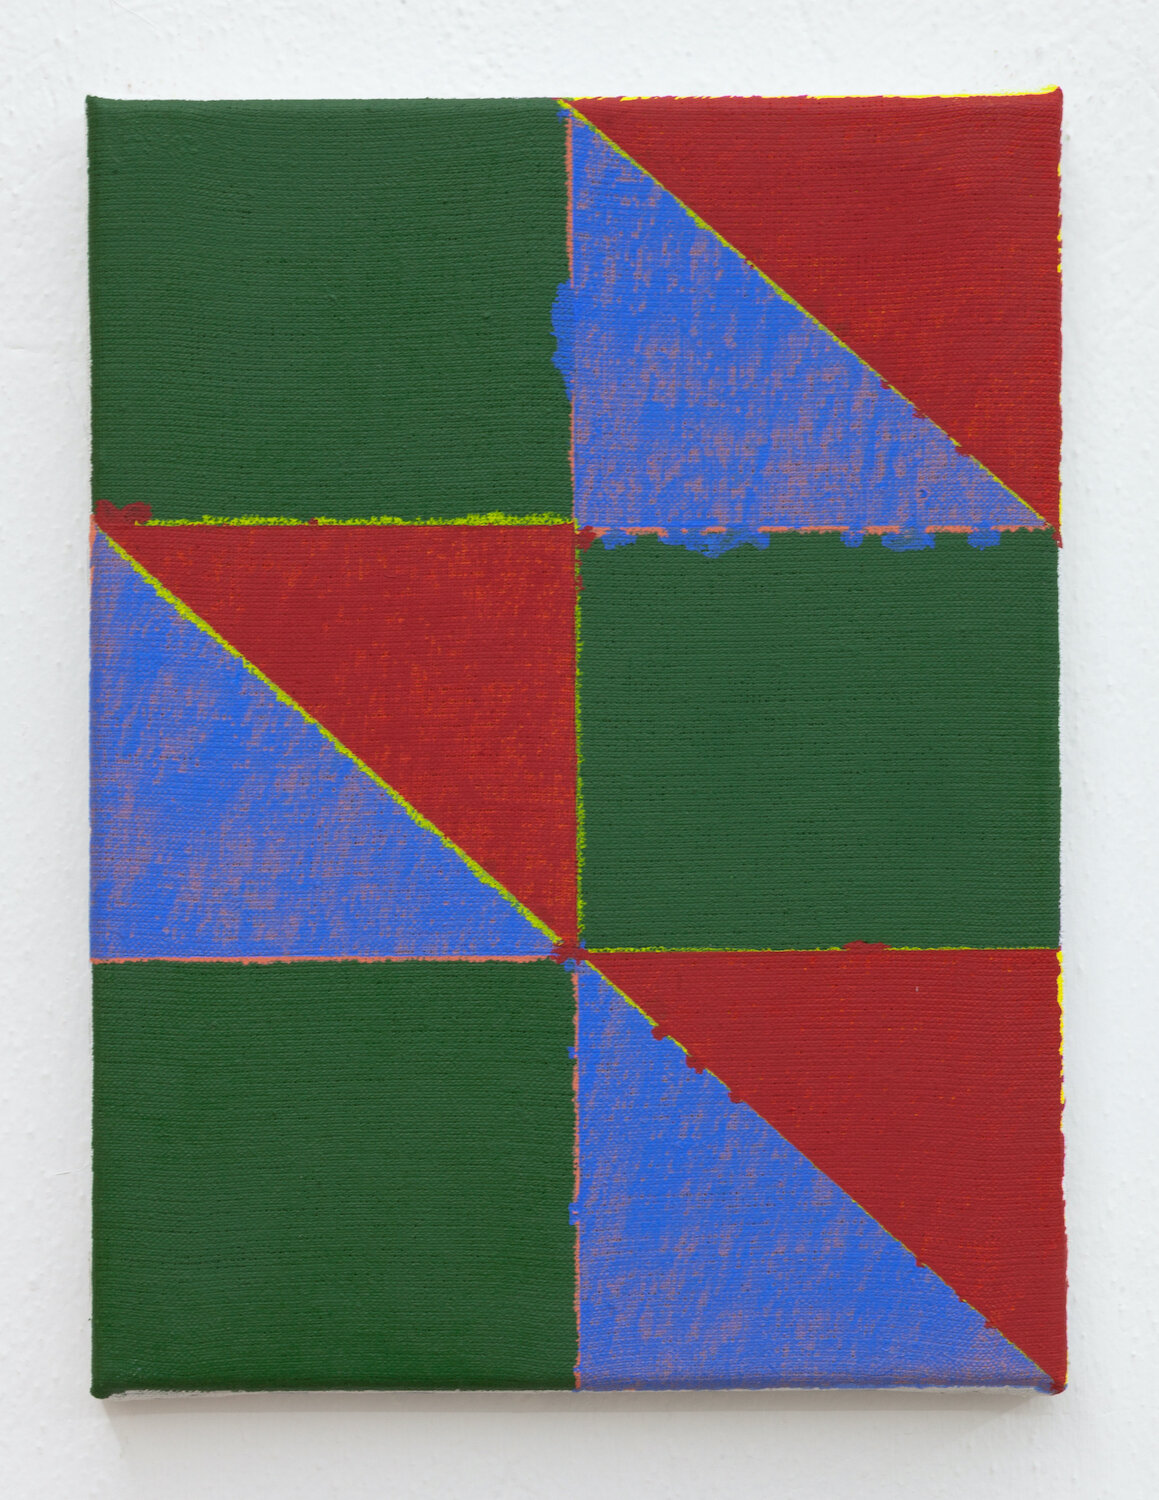  Joshua Abelow,  Untitled (Abstraction “HZ”) , 2019, Oil on linen, 12 x 9 inches 